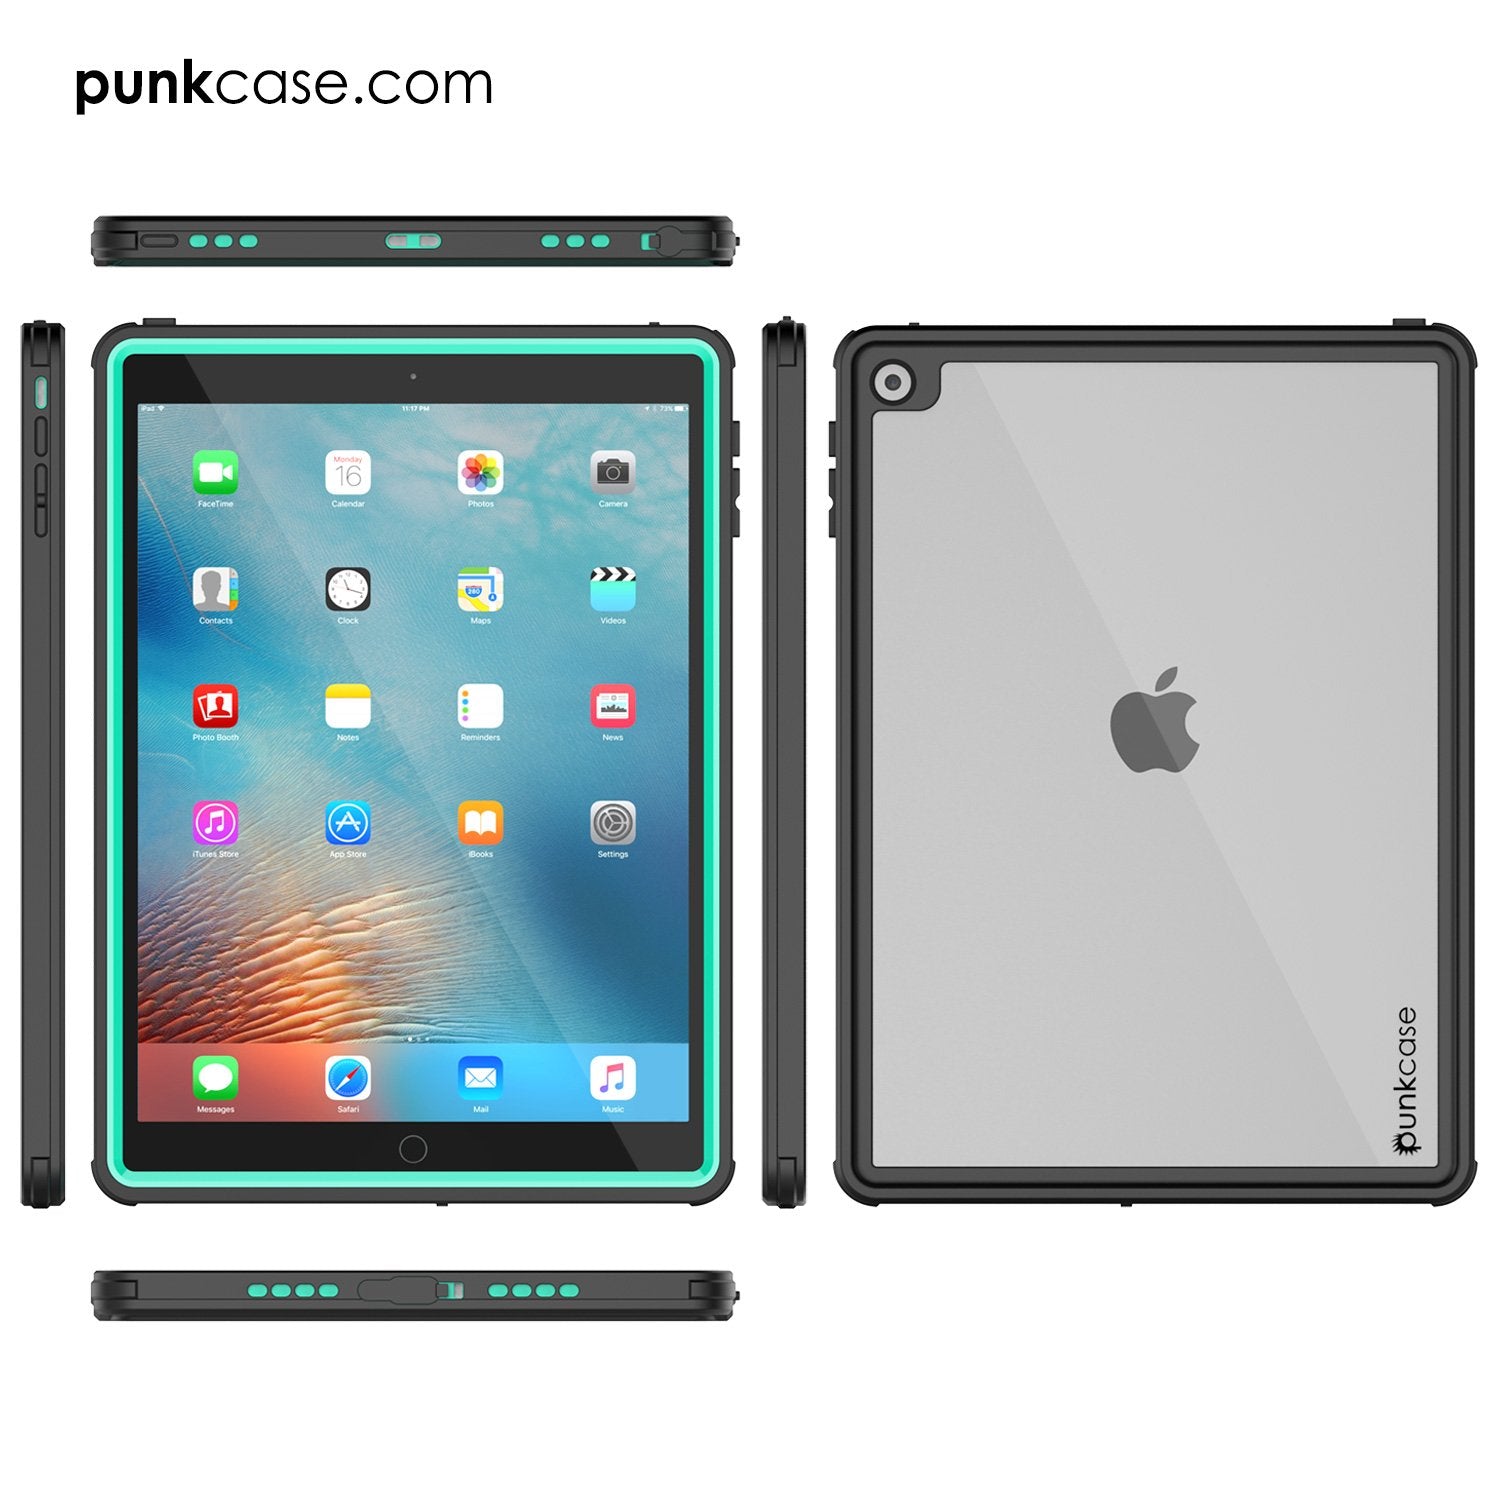 Punkcase iPad Pro 9.7 Case [CRYSTAL Series], Waterproof, Ultra-Thin Cover [Shockproof] [Dustproof] with Built-in Screen Protector [Teal]